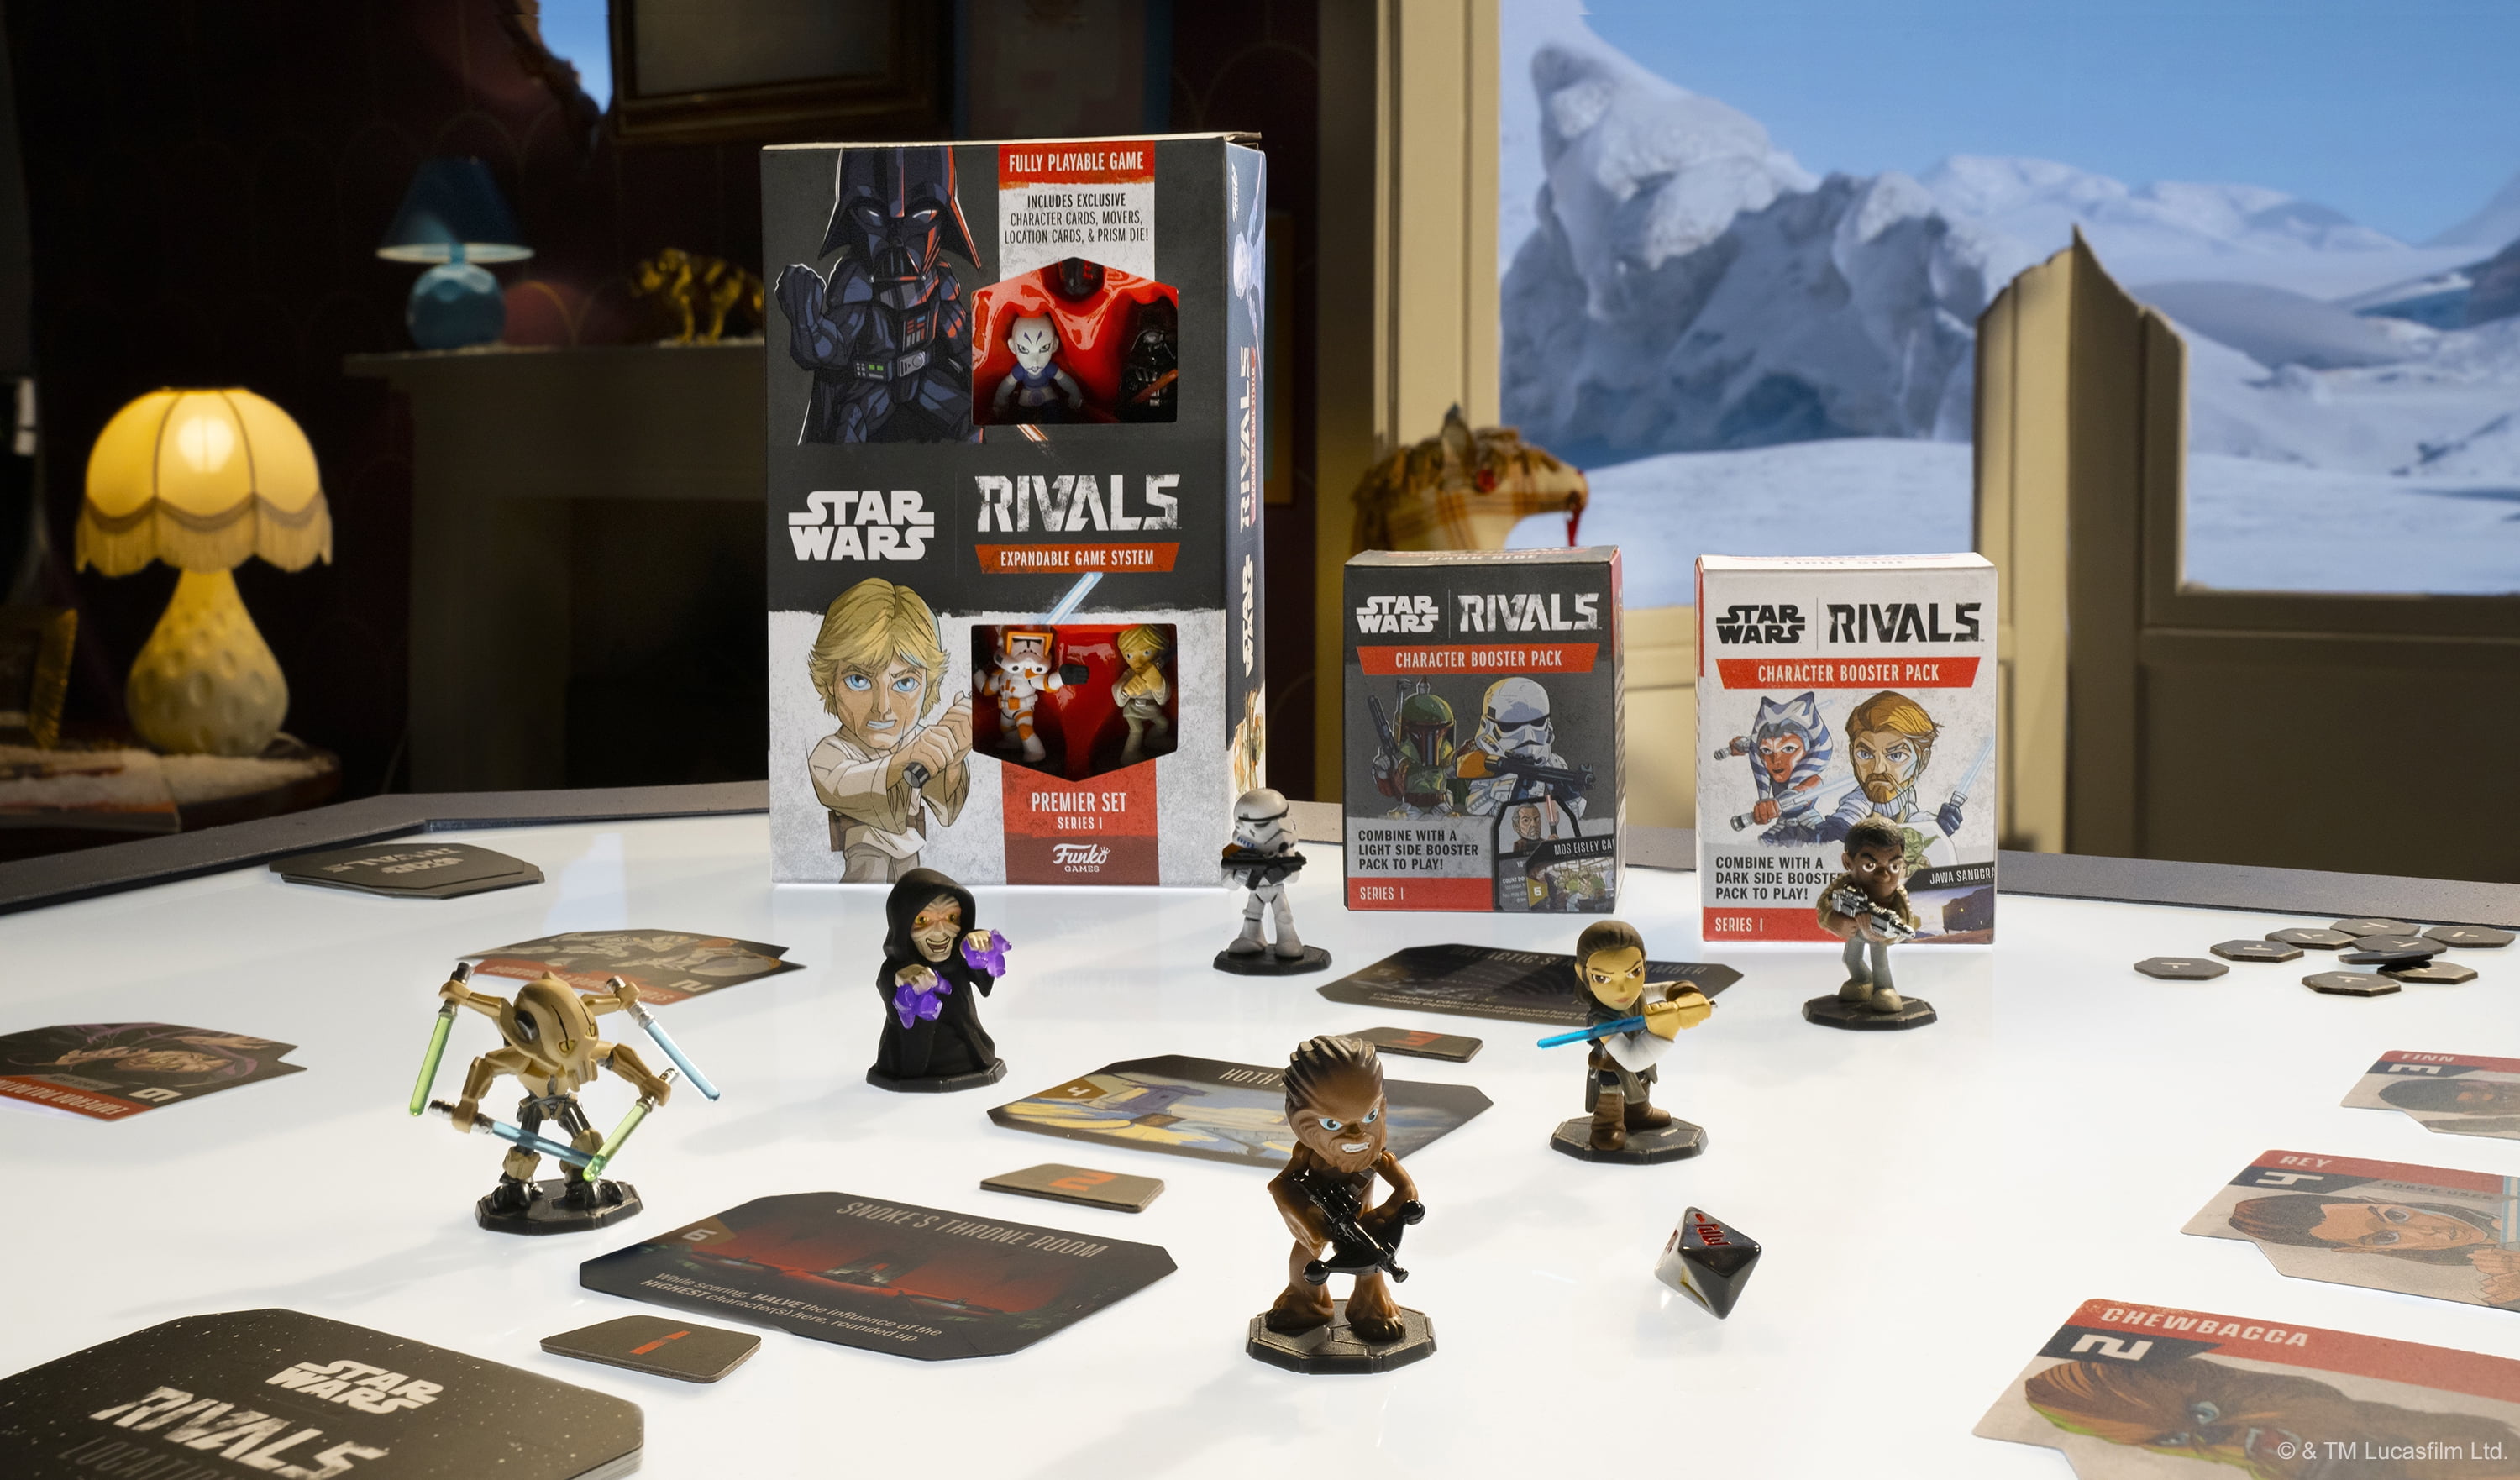 Funko Star Wars Rivals Expandable Card Game, Premier Set Two Player  Expandable Game System 